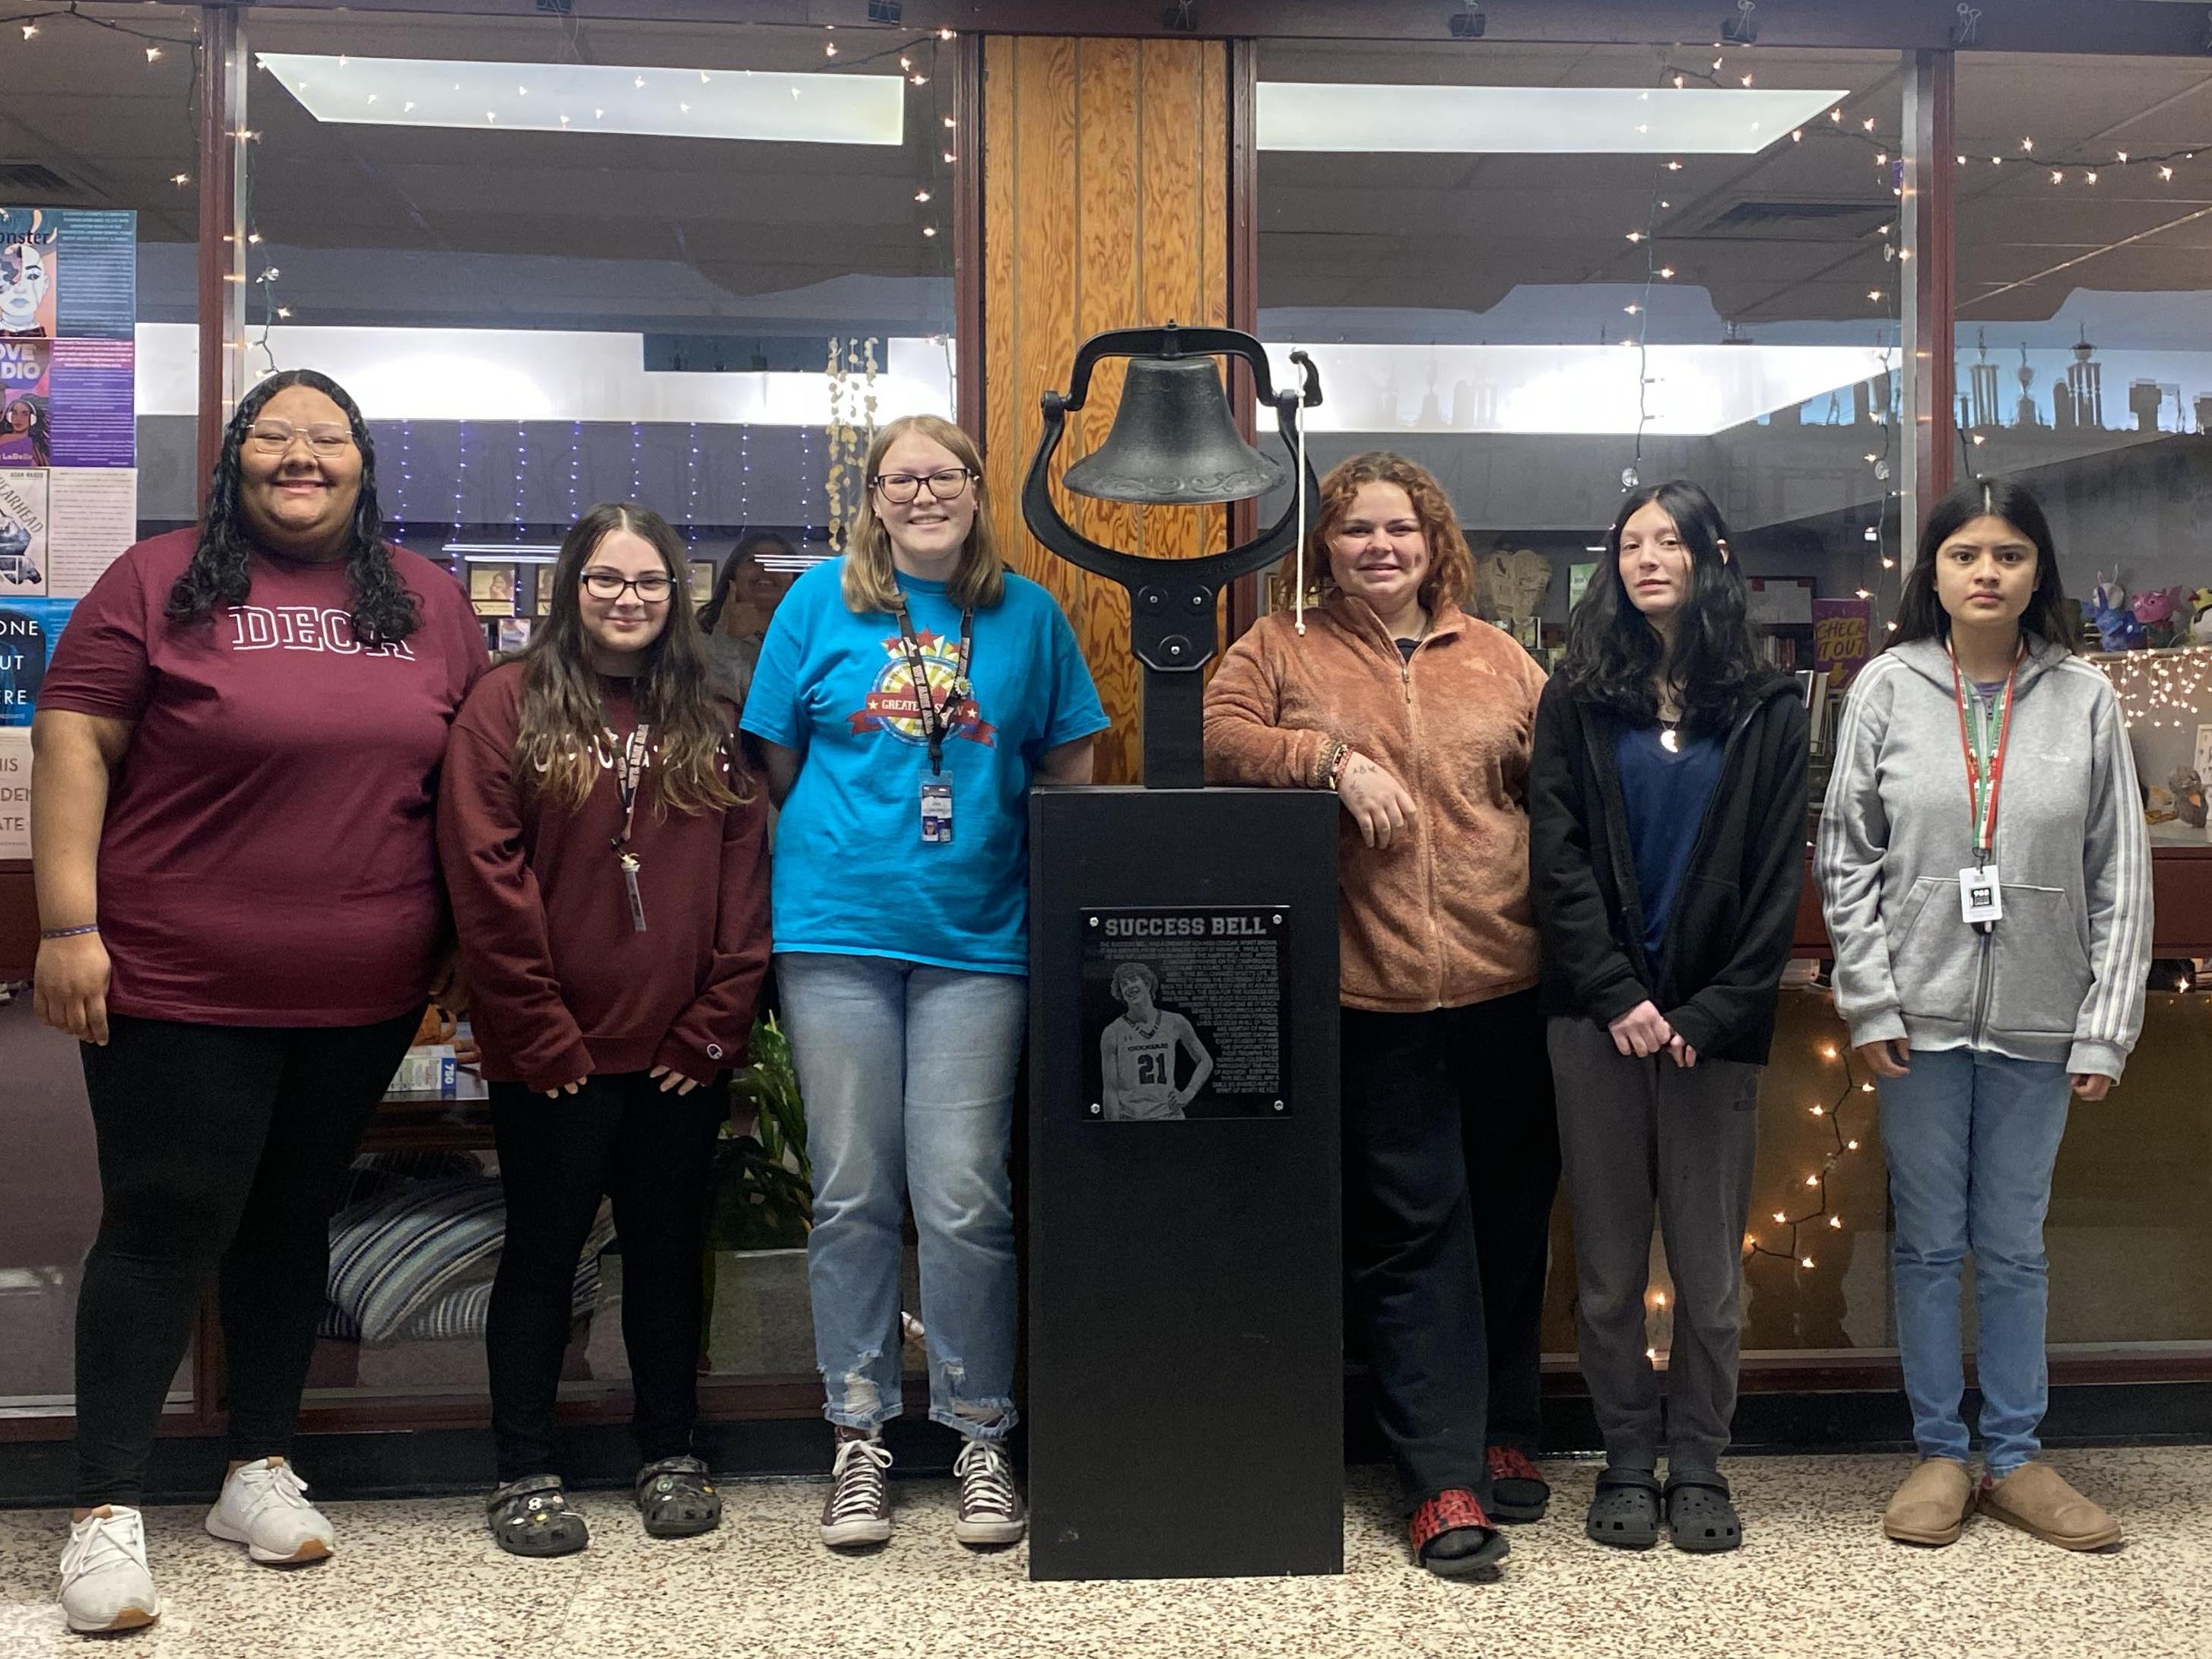 yearbook students pose with the success bell at Ada High School.